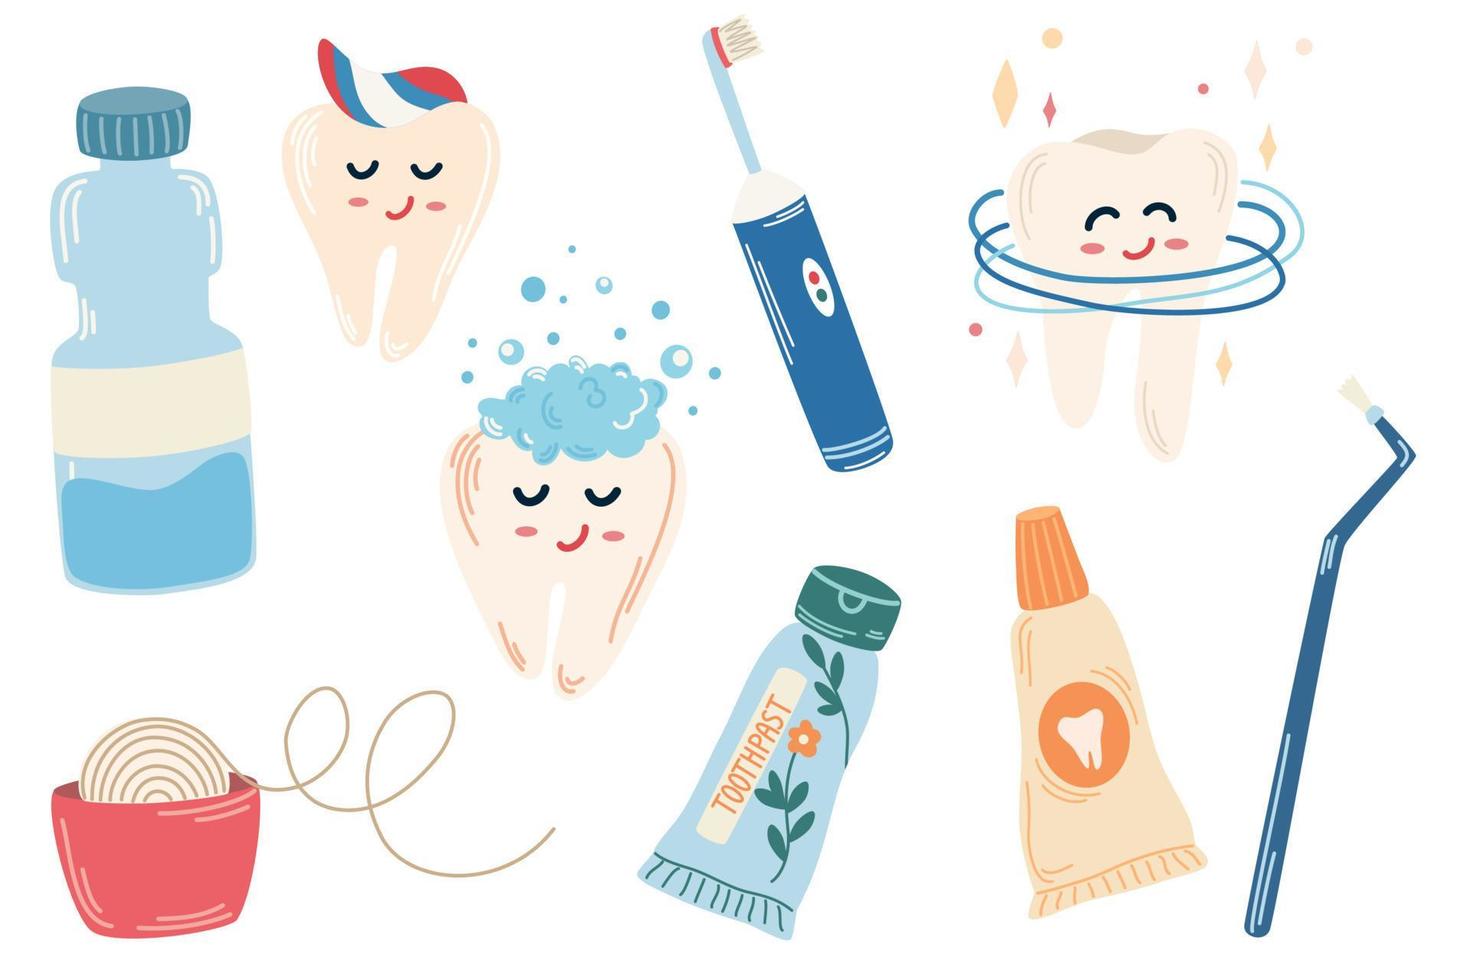 Cleaning teeth. Set of teeth cleaning, toothpaste, brush, floss, happy teeth. Dental and oral care abstract concept. Cartoon contemporary flat vector illustration